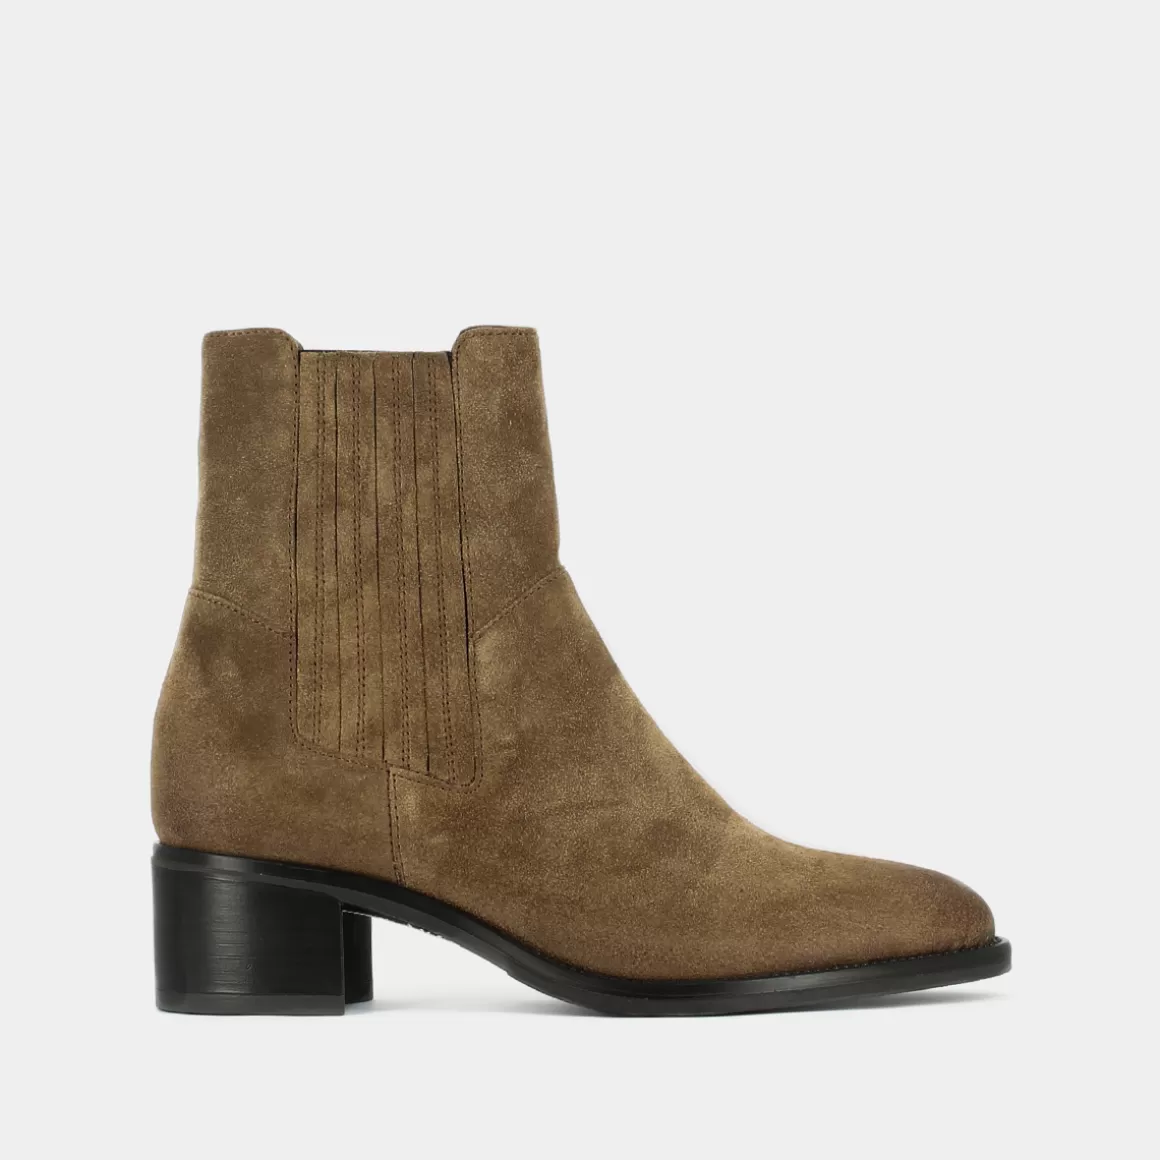 Boots with elastic band and square heel<Jonak Cheap